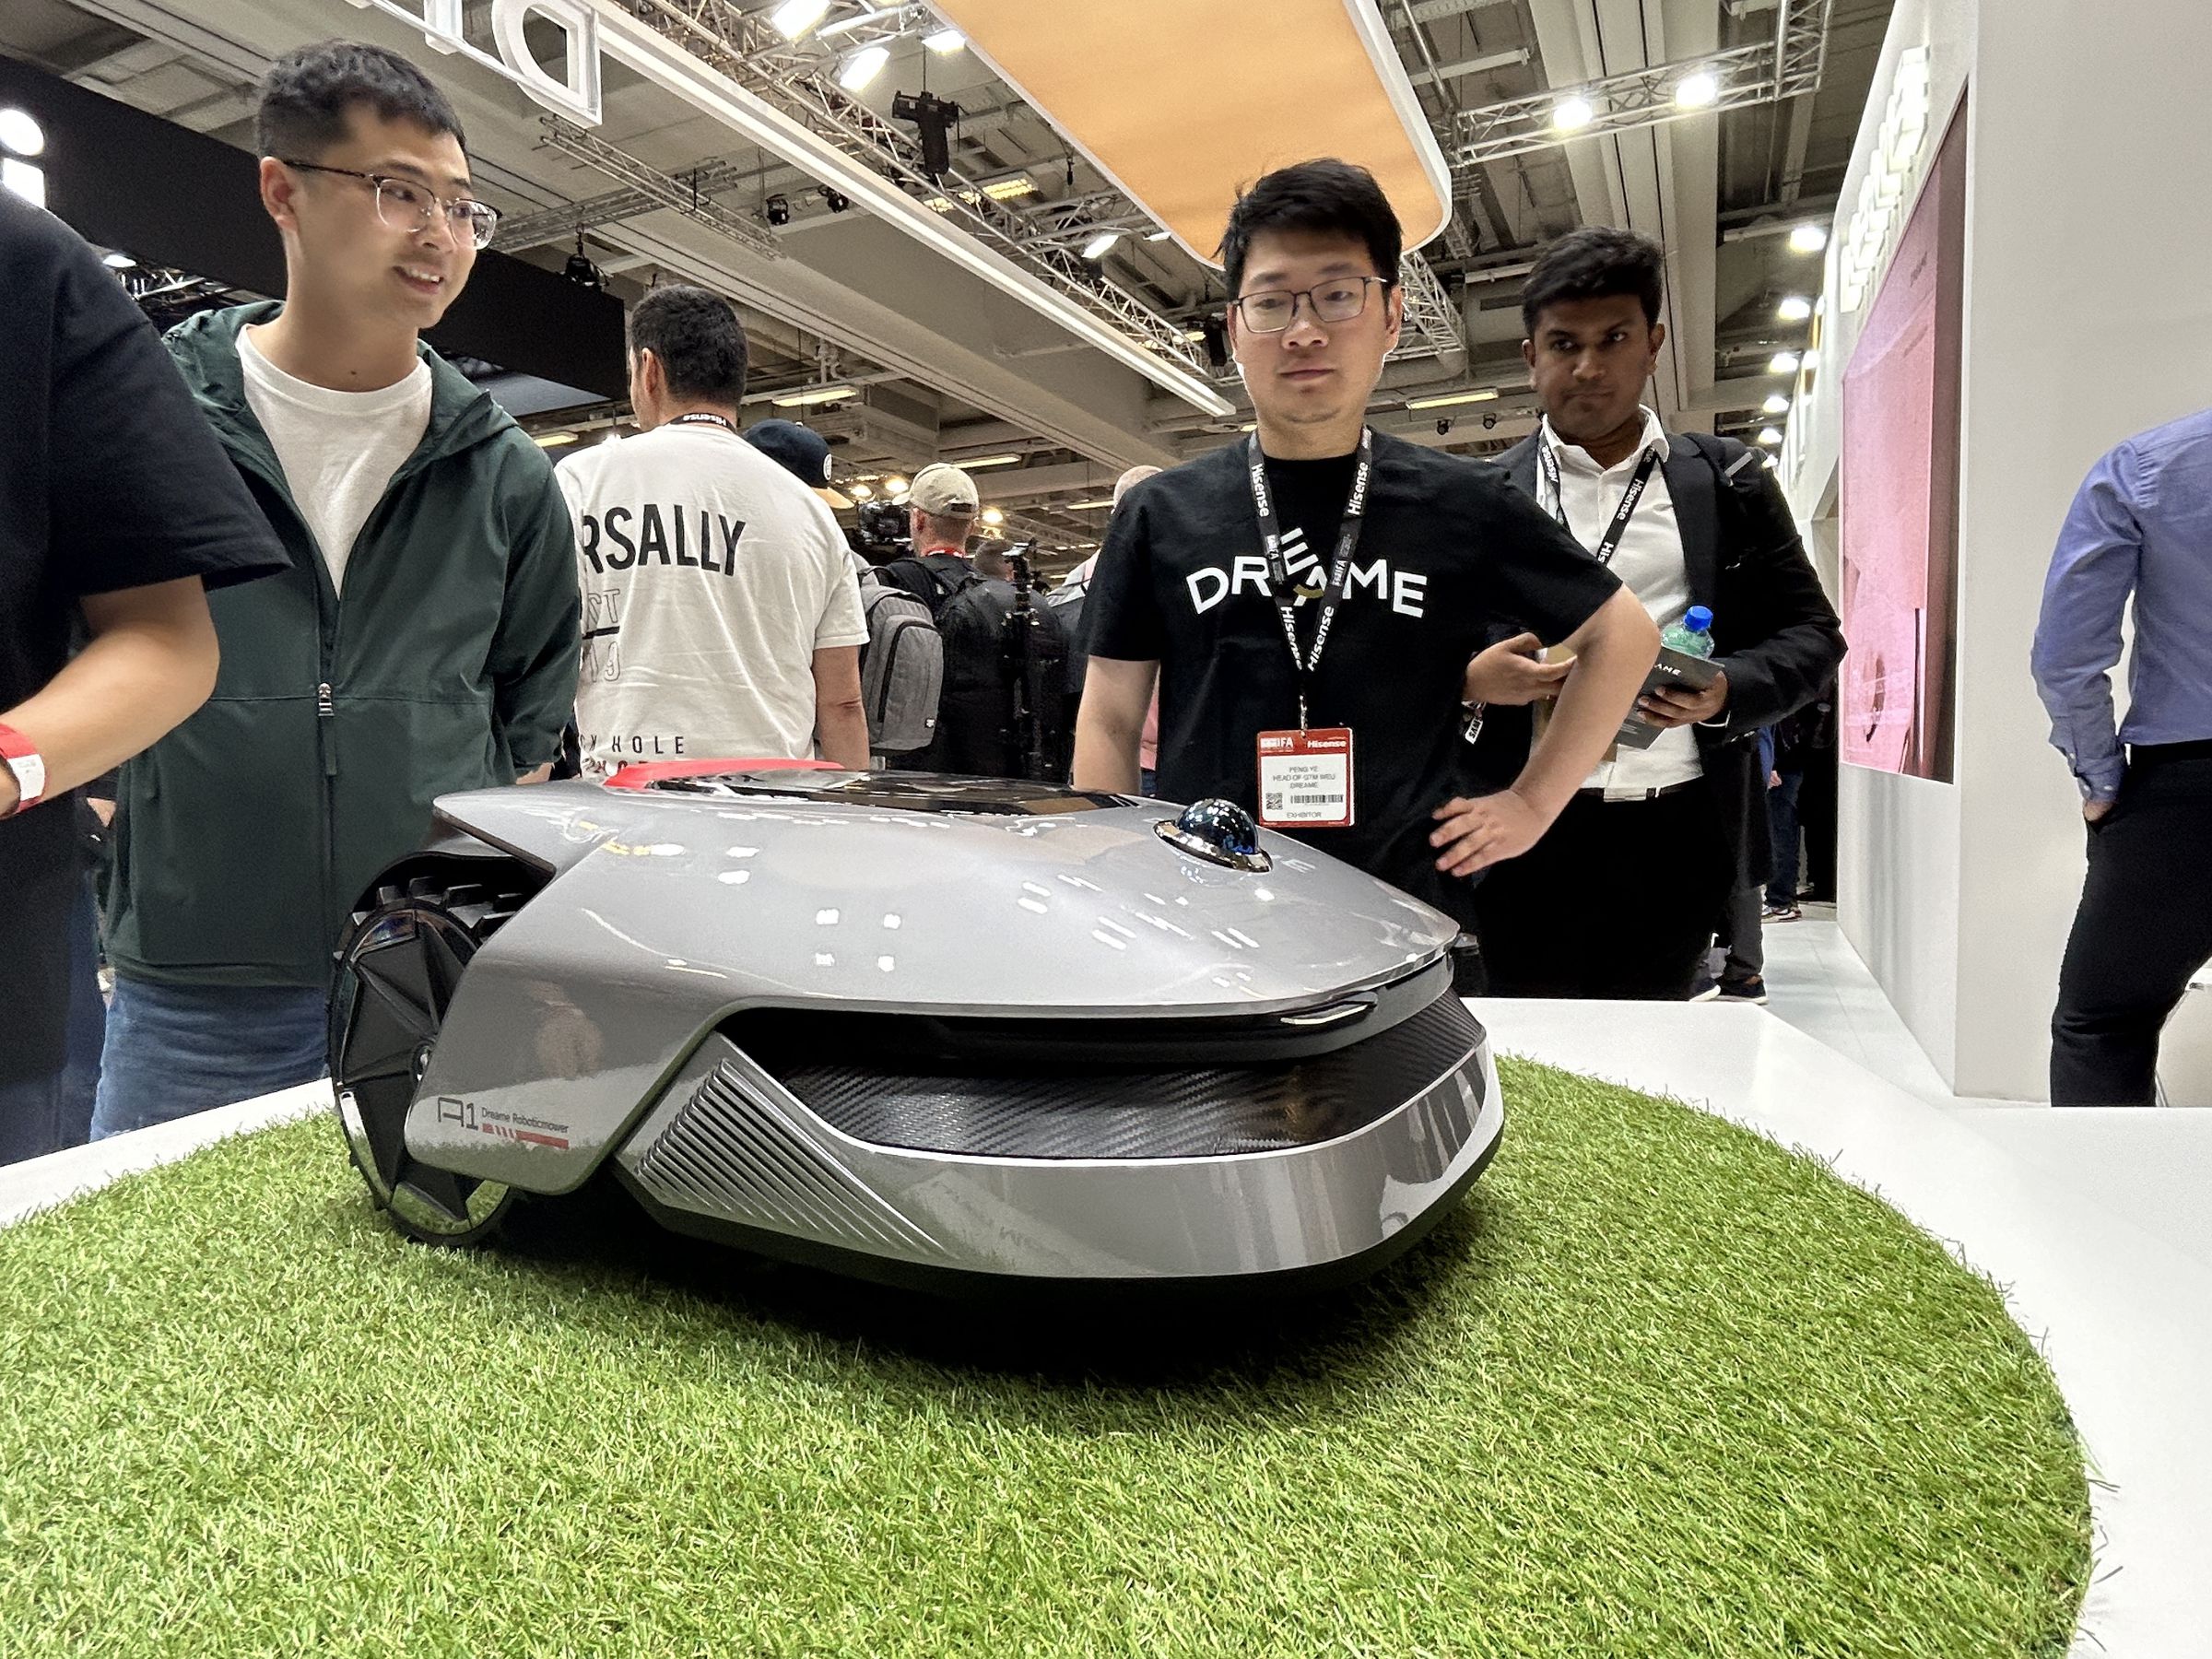 This robot lawnmower could take one more chore off your To Do.